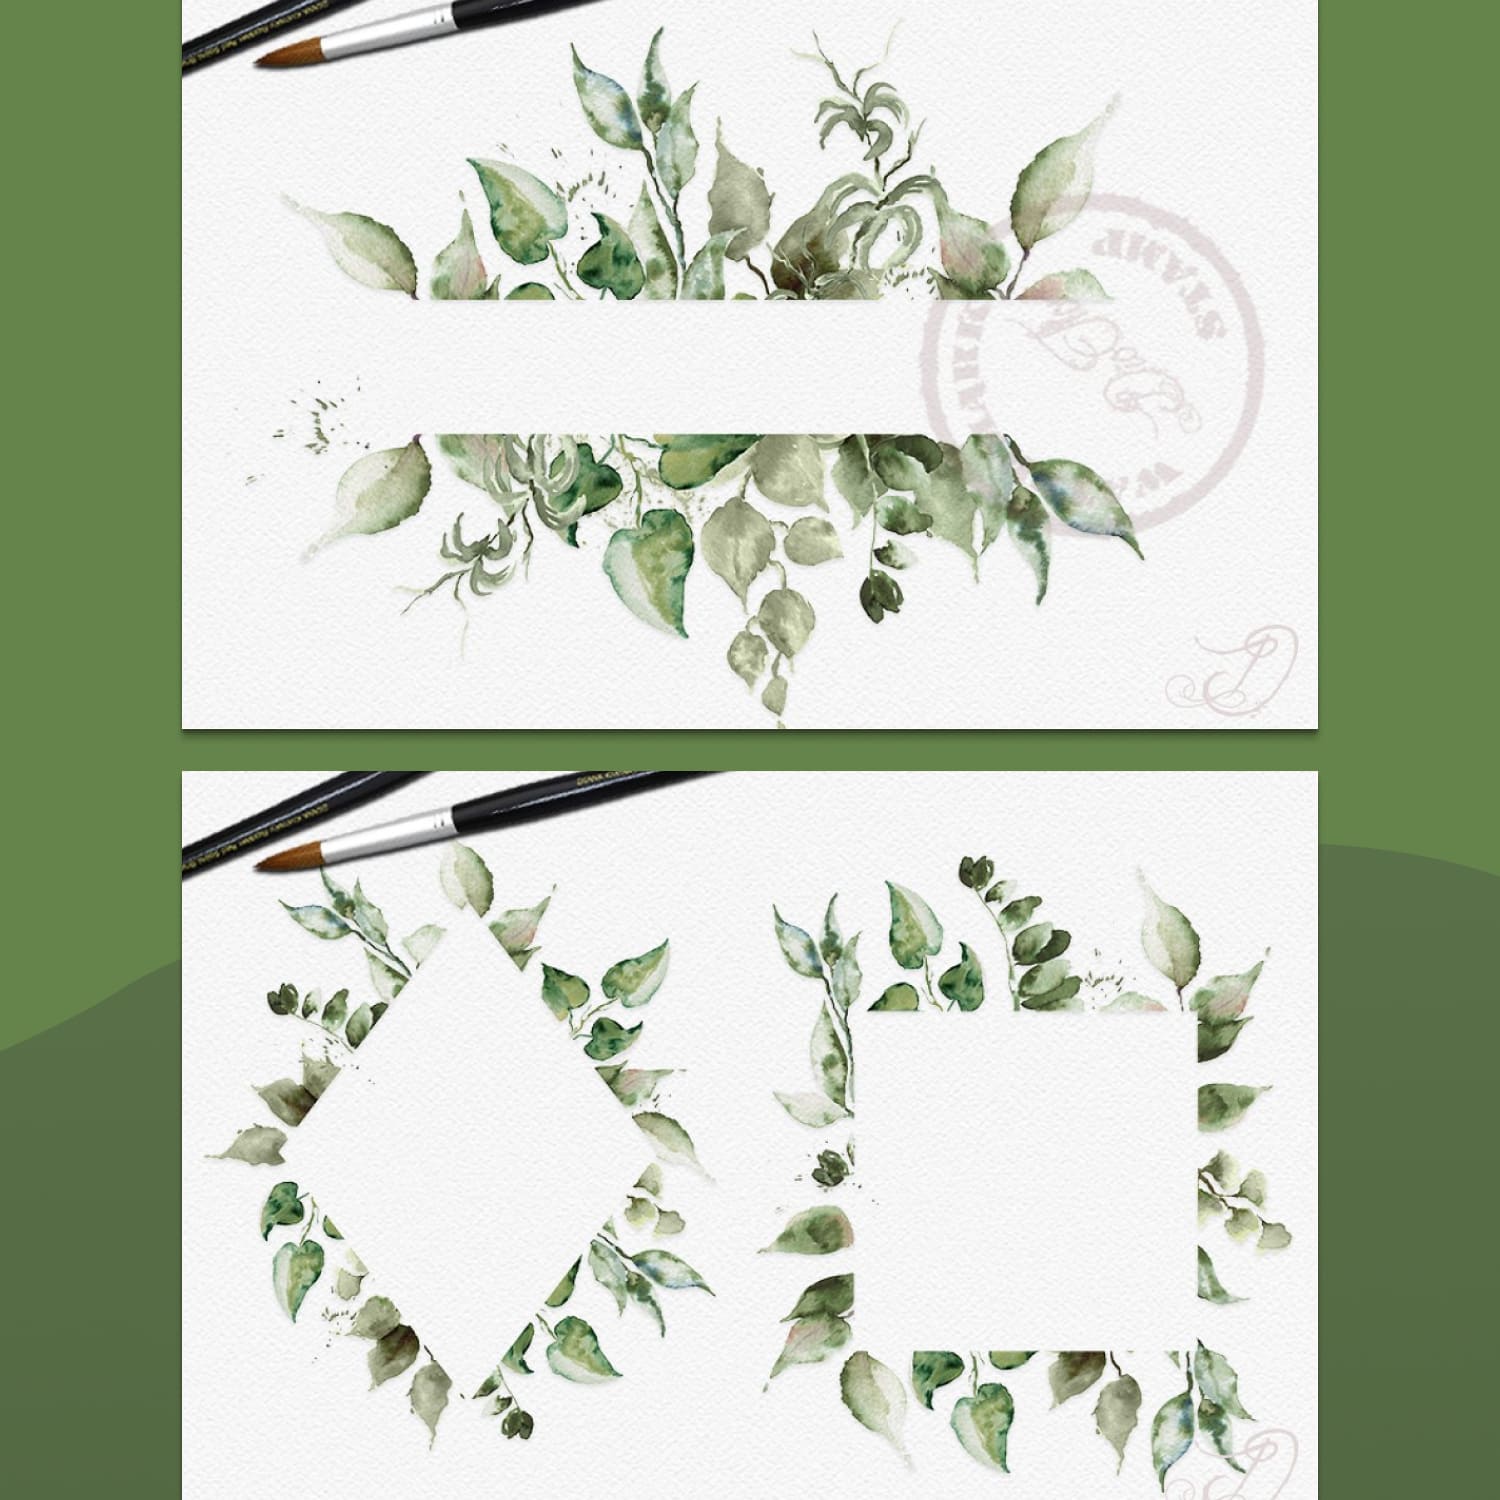 Watercolor Leaves Frames Clip Art cover.